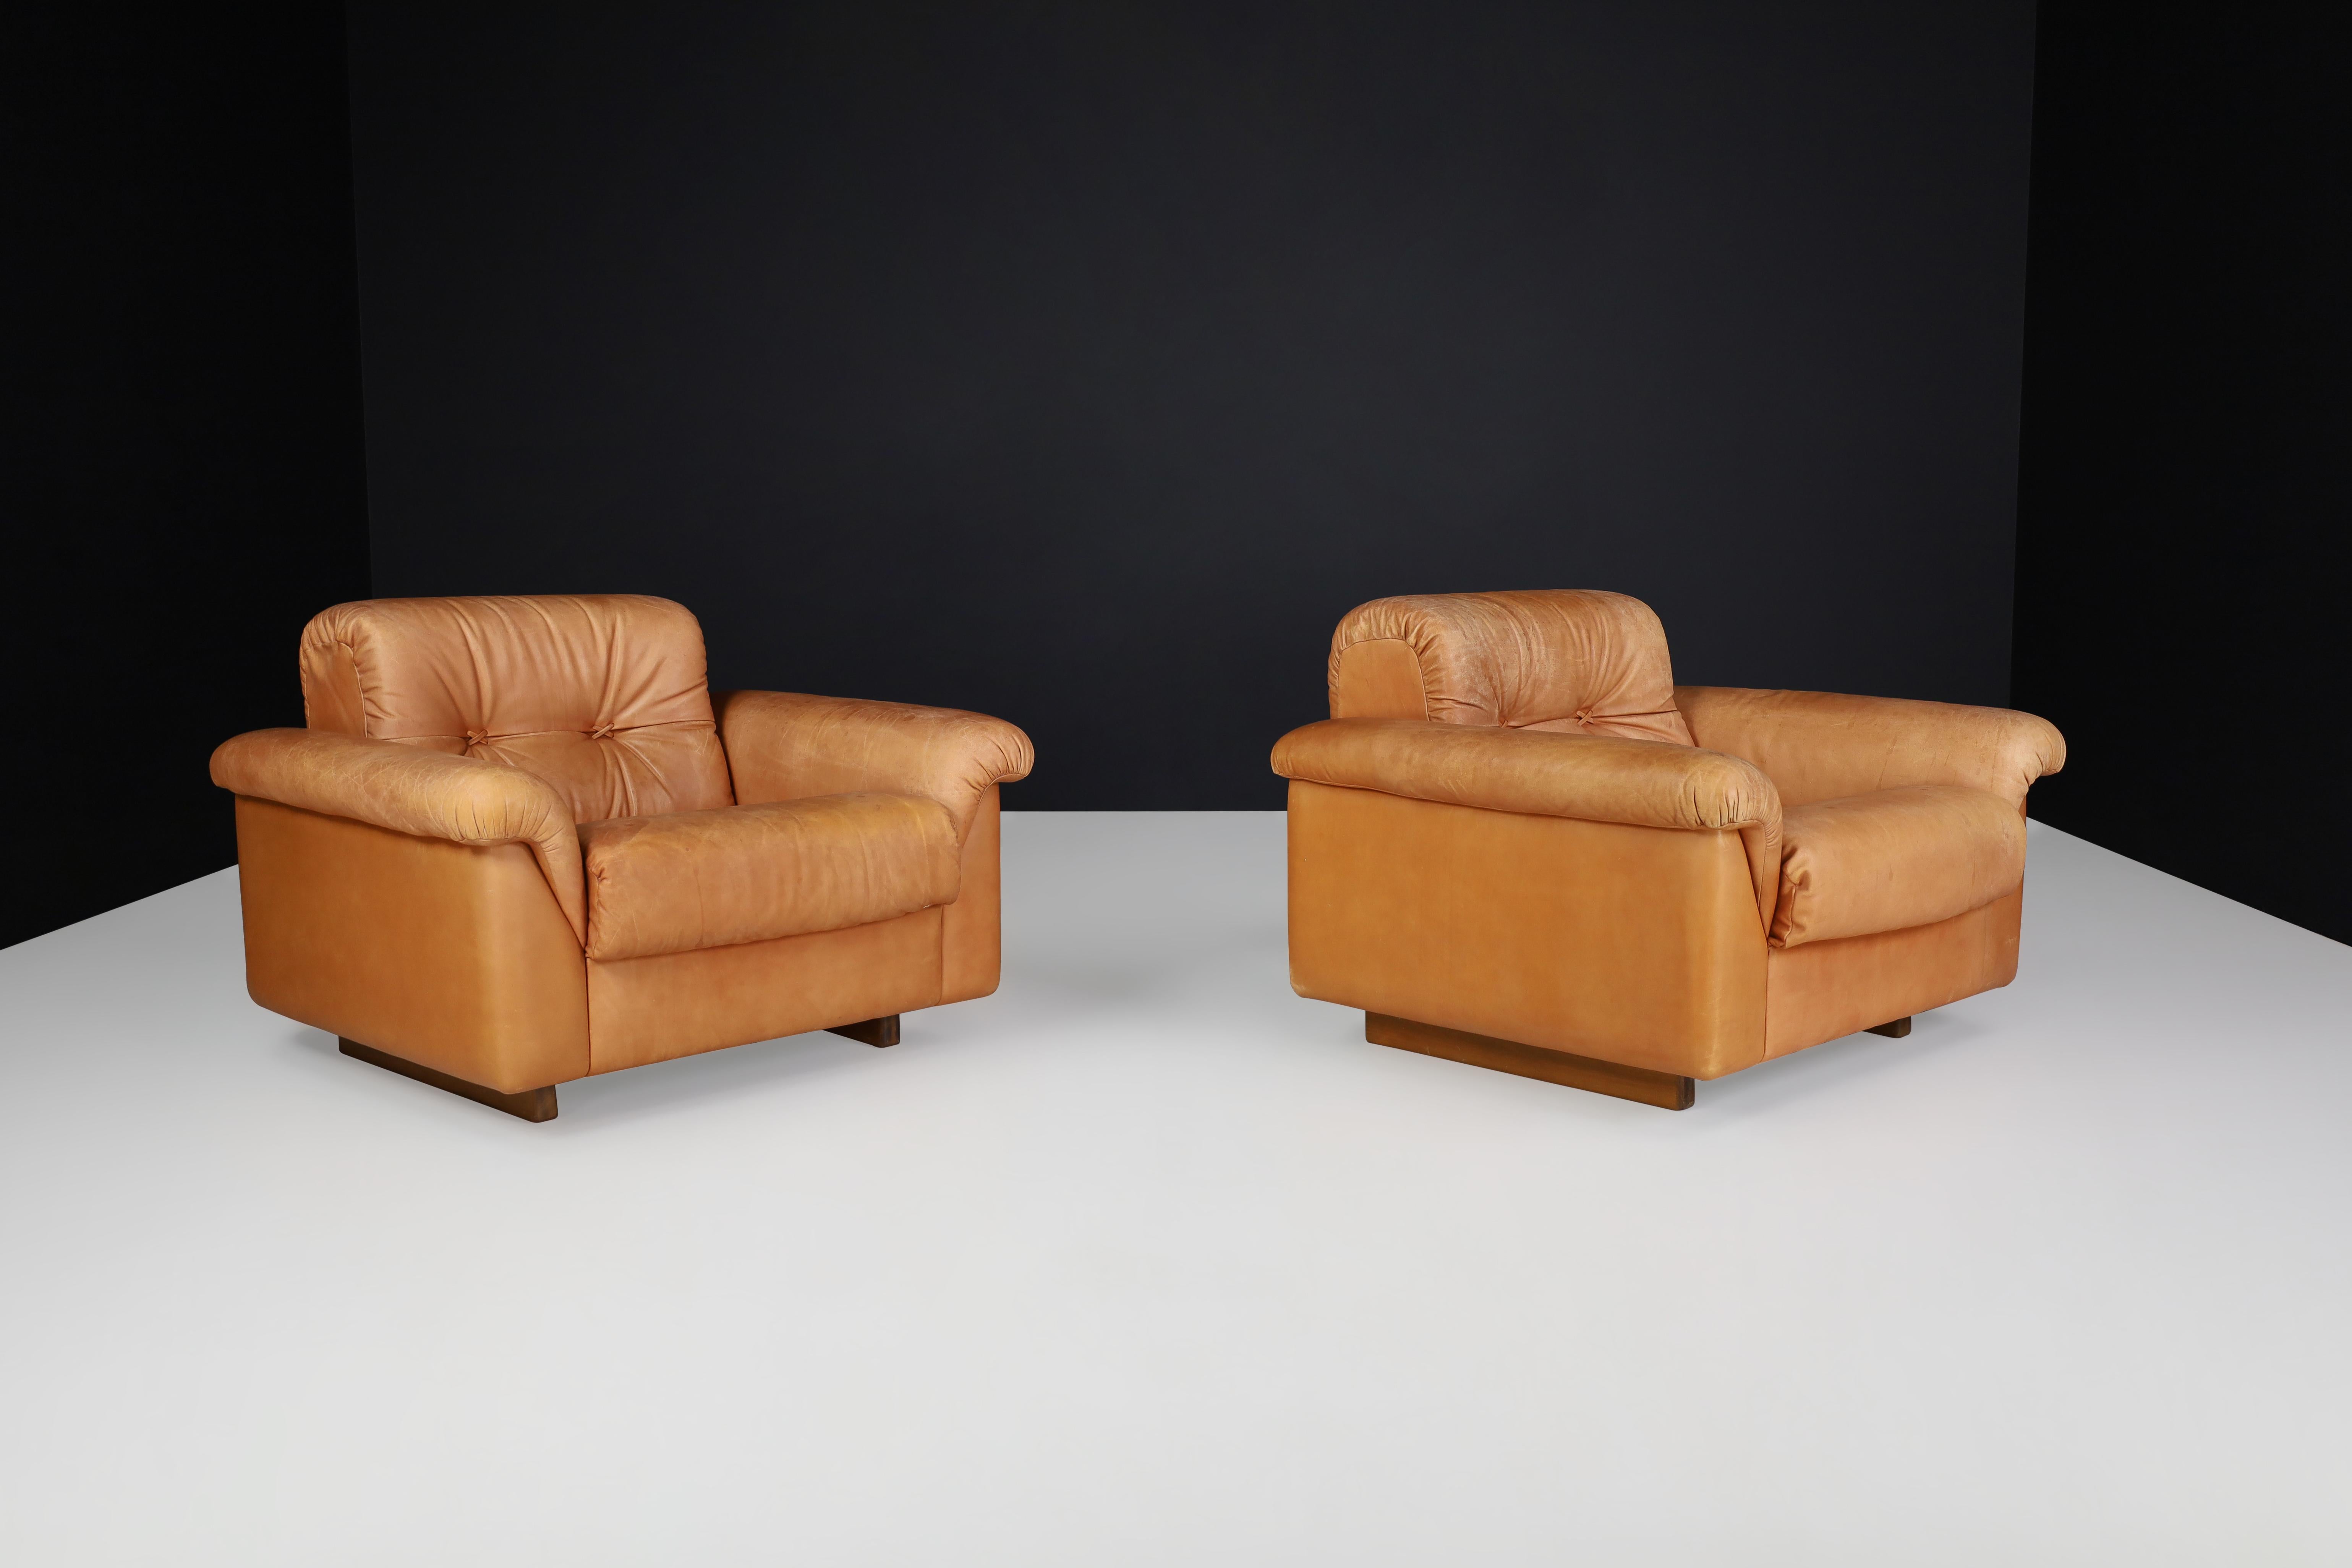 20th Century De Sede DS 45 Lounge Chairs in Patinated Leather, Switzerland, 1970s For Sale